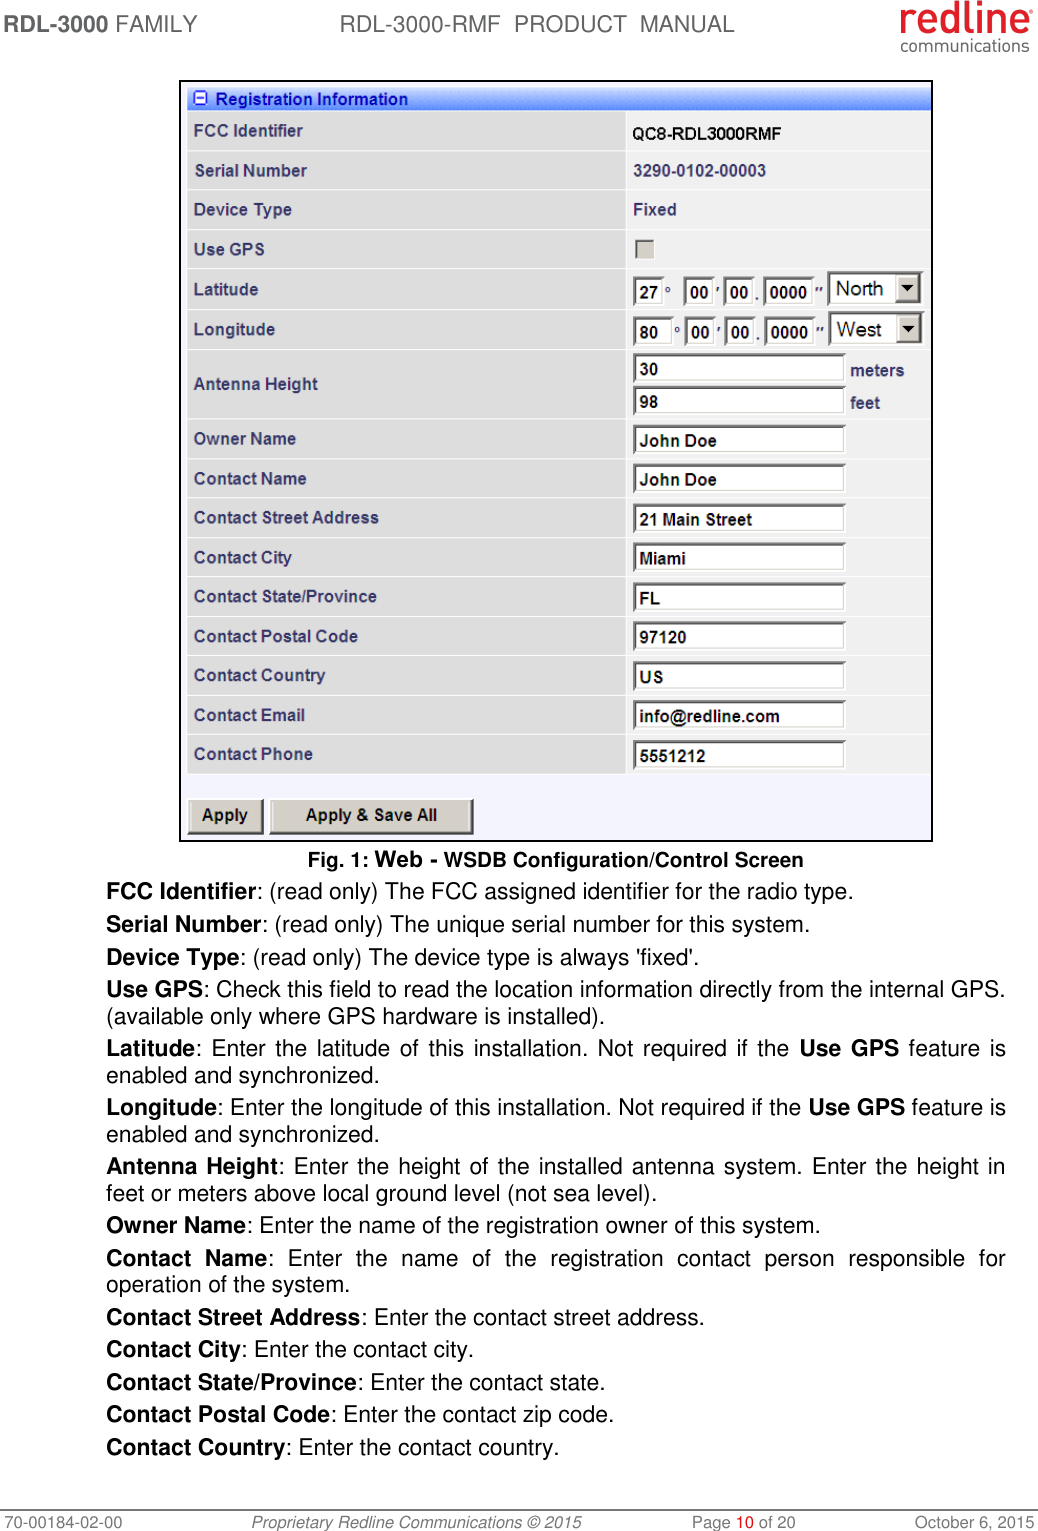 RDL-3000 FAMILY RDL-3000-RMF  PRODUCT  MANUAL 70-00184-02-00 Proprietary Redline Communications © 2015  Page 10 of 20  October 6, 2015  Fig. 1: Web - WSDB Configuration/Control Screen FCC Identifier: (read only) The FCC assigned identifier for the radio type. Serial Number: (read only) The unique serial number for this system. Device Type: (read only) The device type is always &apos;fixed&apos;. Use GPS: Check this field to read the location information directly from the internal GPS. (available only where GPS hardware is installed).  Latitude: Enter the latitude of this installation. Not required if the  Use GPS feature is enabled and synchronized. Longitude: Enter the longitude of this installation. Not required if the Use GPS feature is enabled and synchronized. Antenna Height: Enter the height of the installed antenna system. Enter the height in feet or meters above local ground level (not sea level). Owner Name: Enter the name of the registration owner of this system. Contact  Name:  Enter  the  name  of  the  registration  contact  person  responsible  for operation of the system. Contact Street Address: Enter the contact street address. Contact City: Enter the contact city. Contact State/Province: Enter the contact state. Contact Postal Code: Enter the contact zip code. Contact Country: Enter the contact country. 